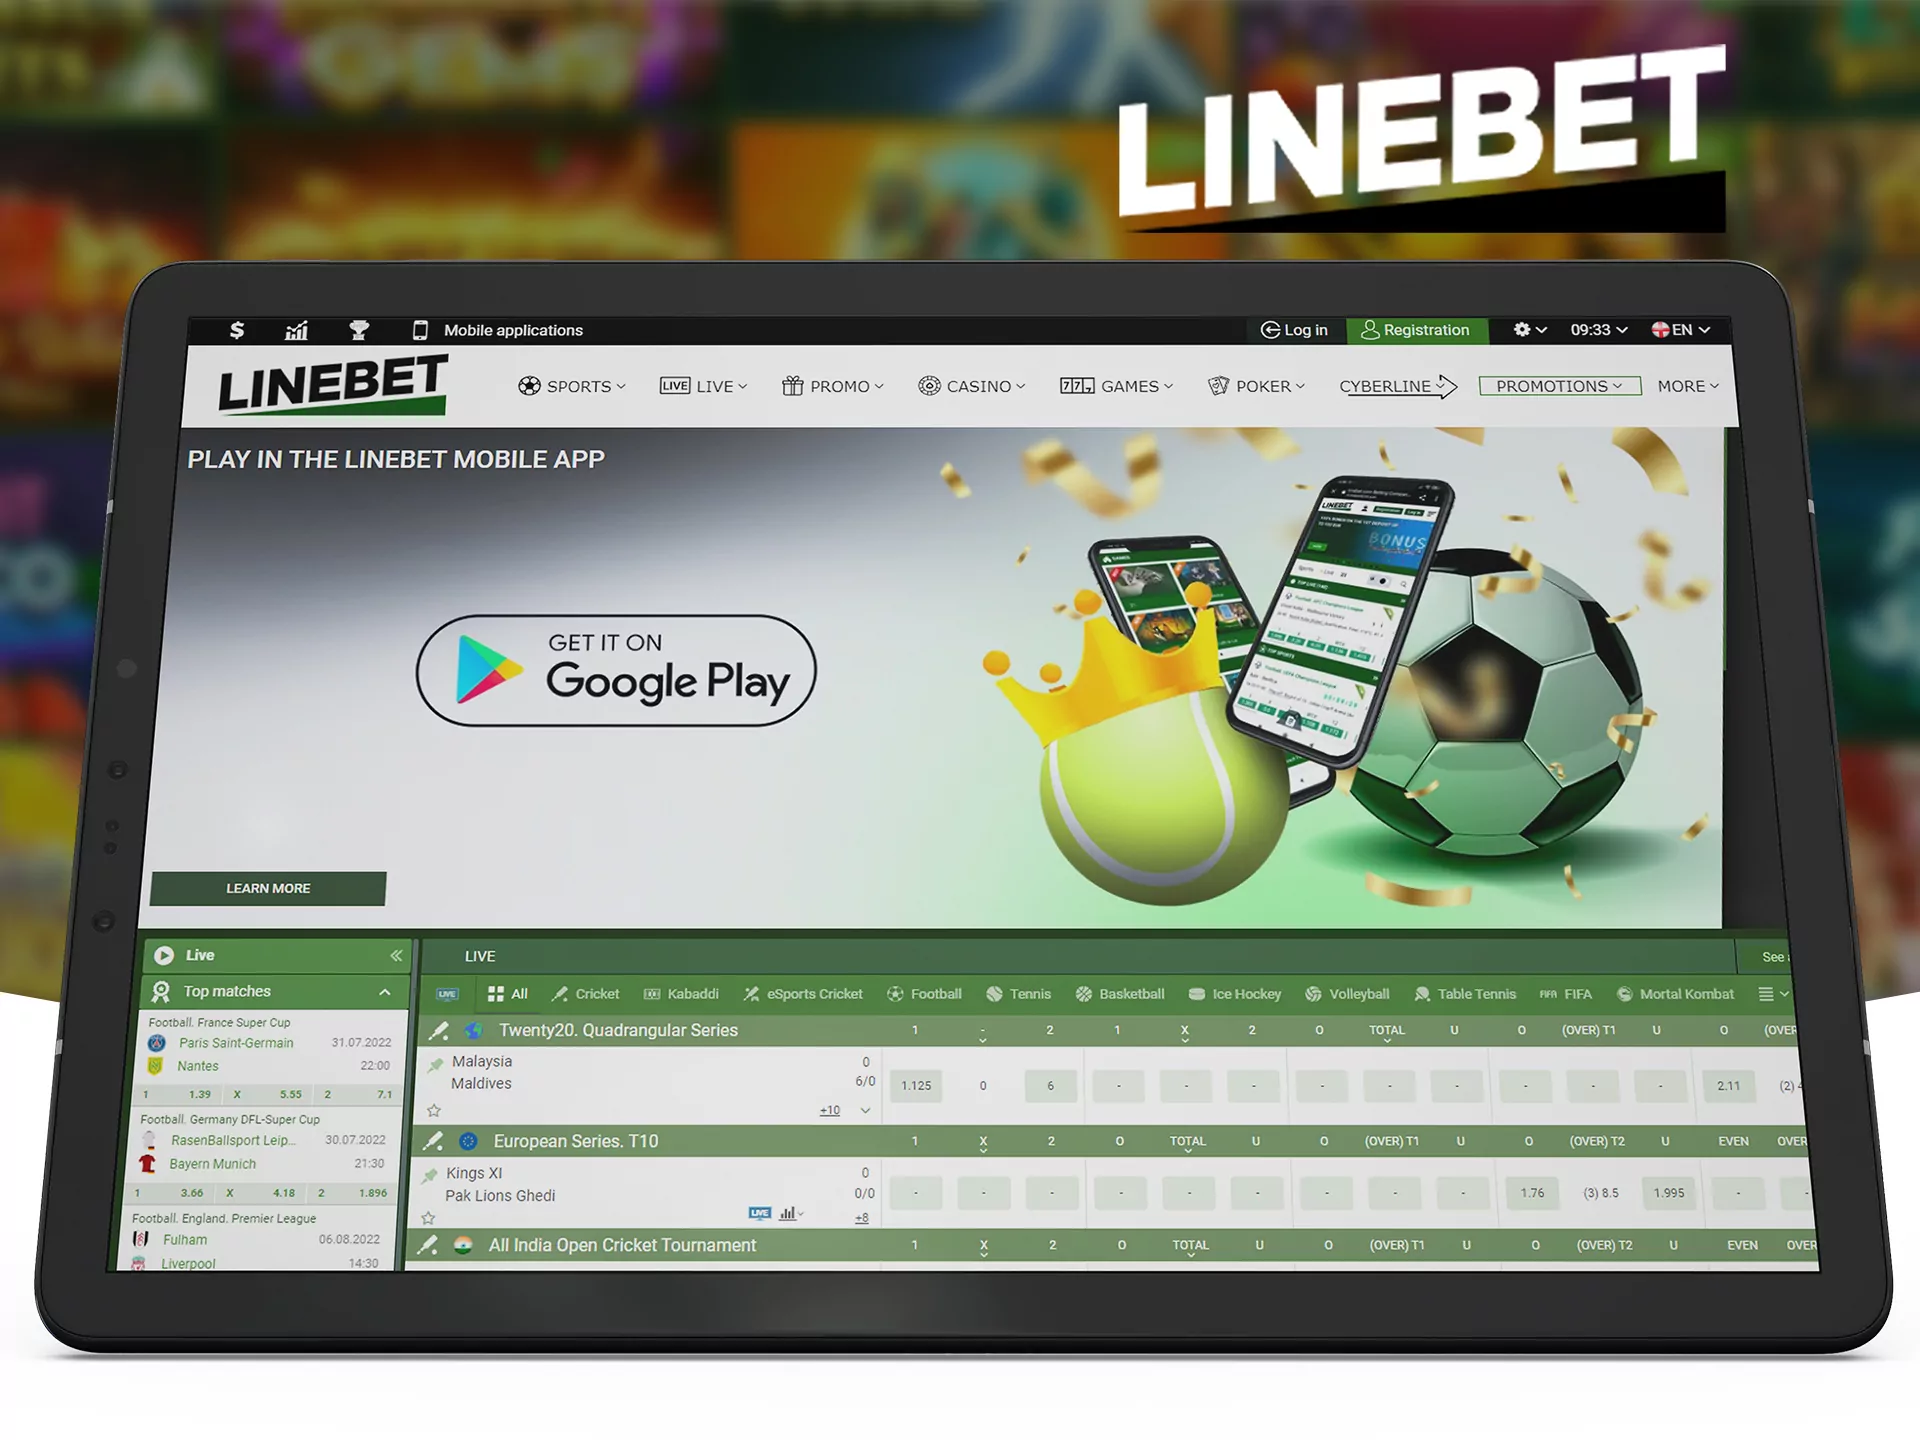 You can use Linebet website with any mobile device and make bets without downloding application.